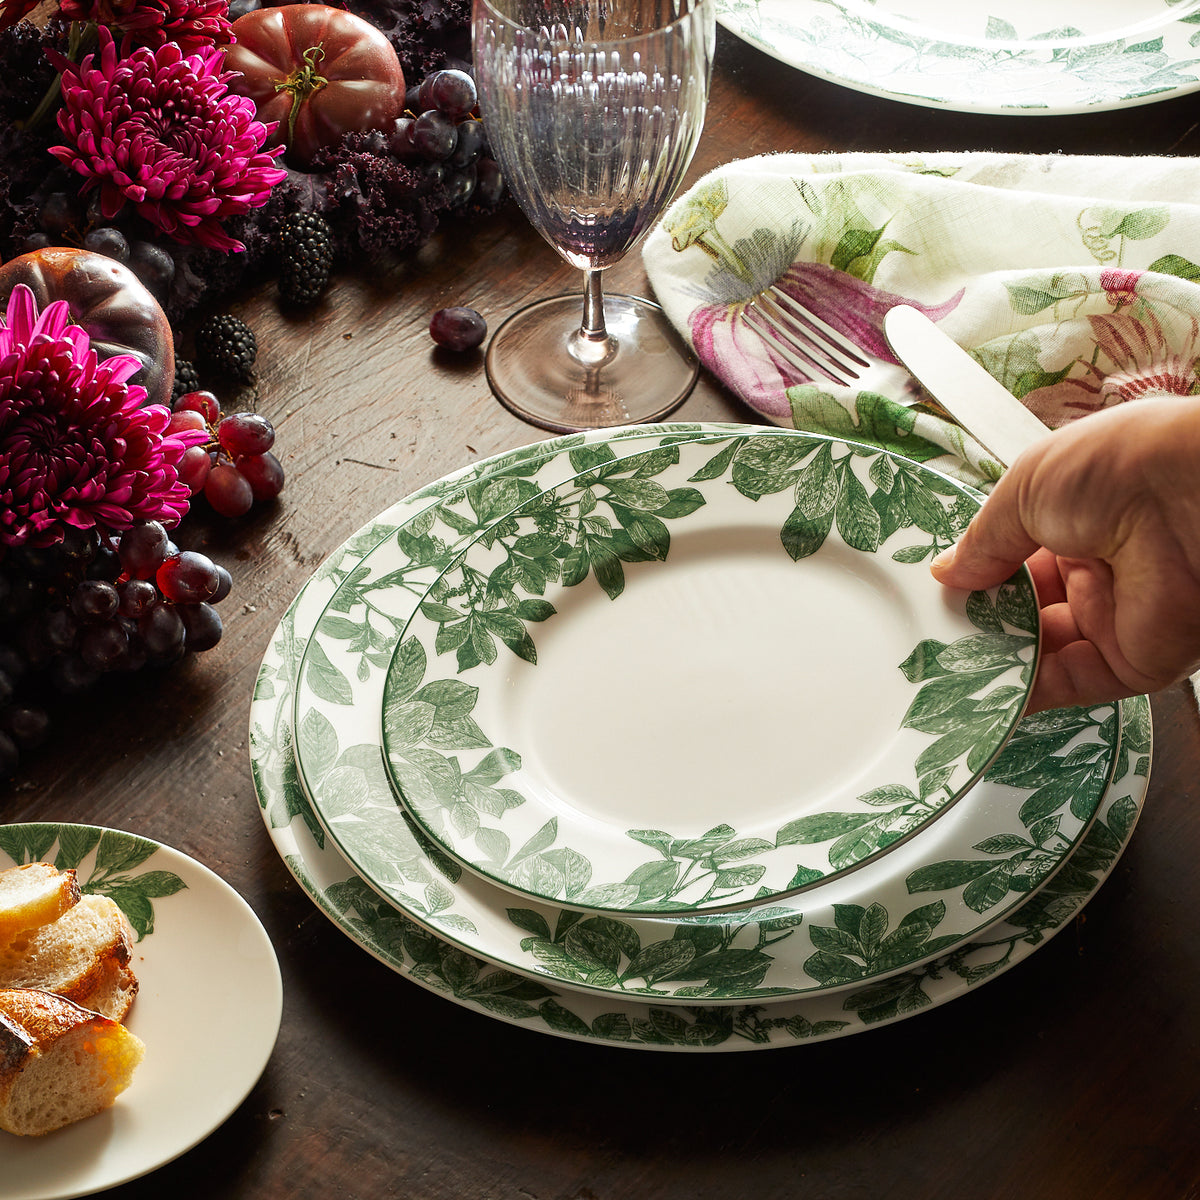 A person is holding a Arbor Green Salad Plate adorned with premium porcelain flowers, from the brand Caskata.